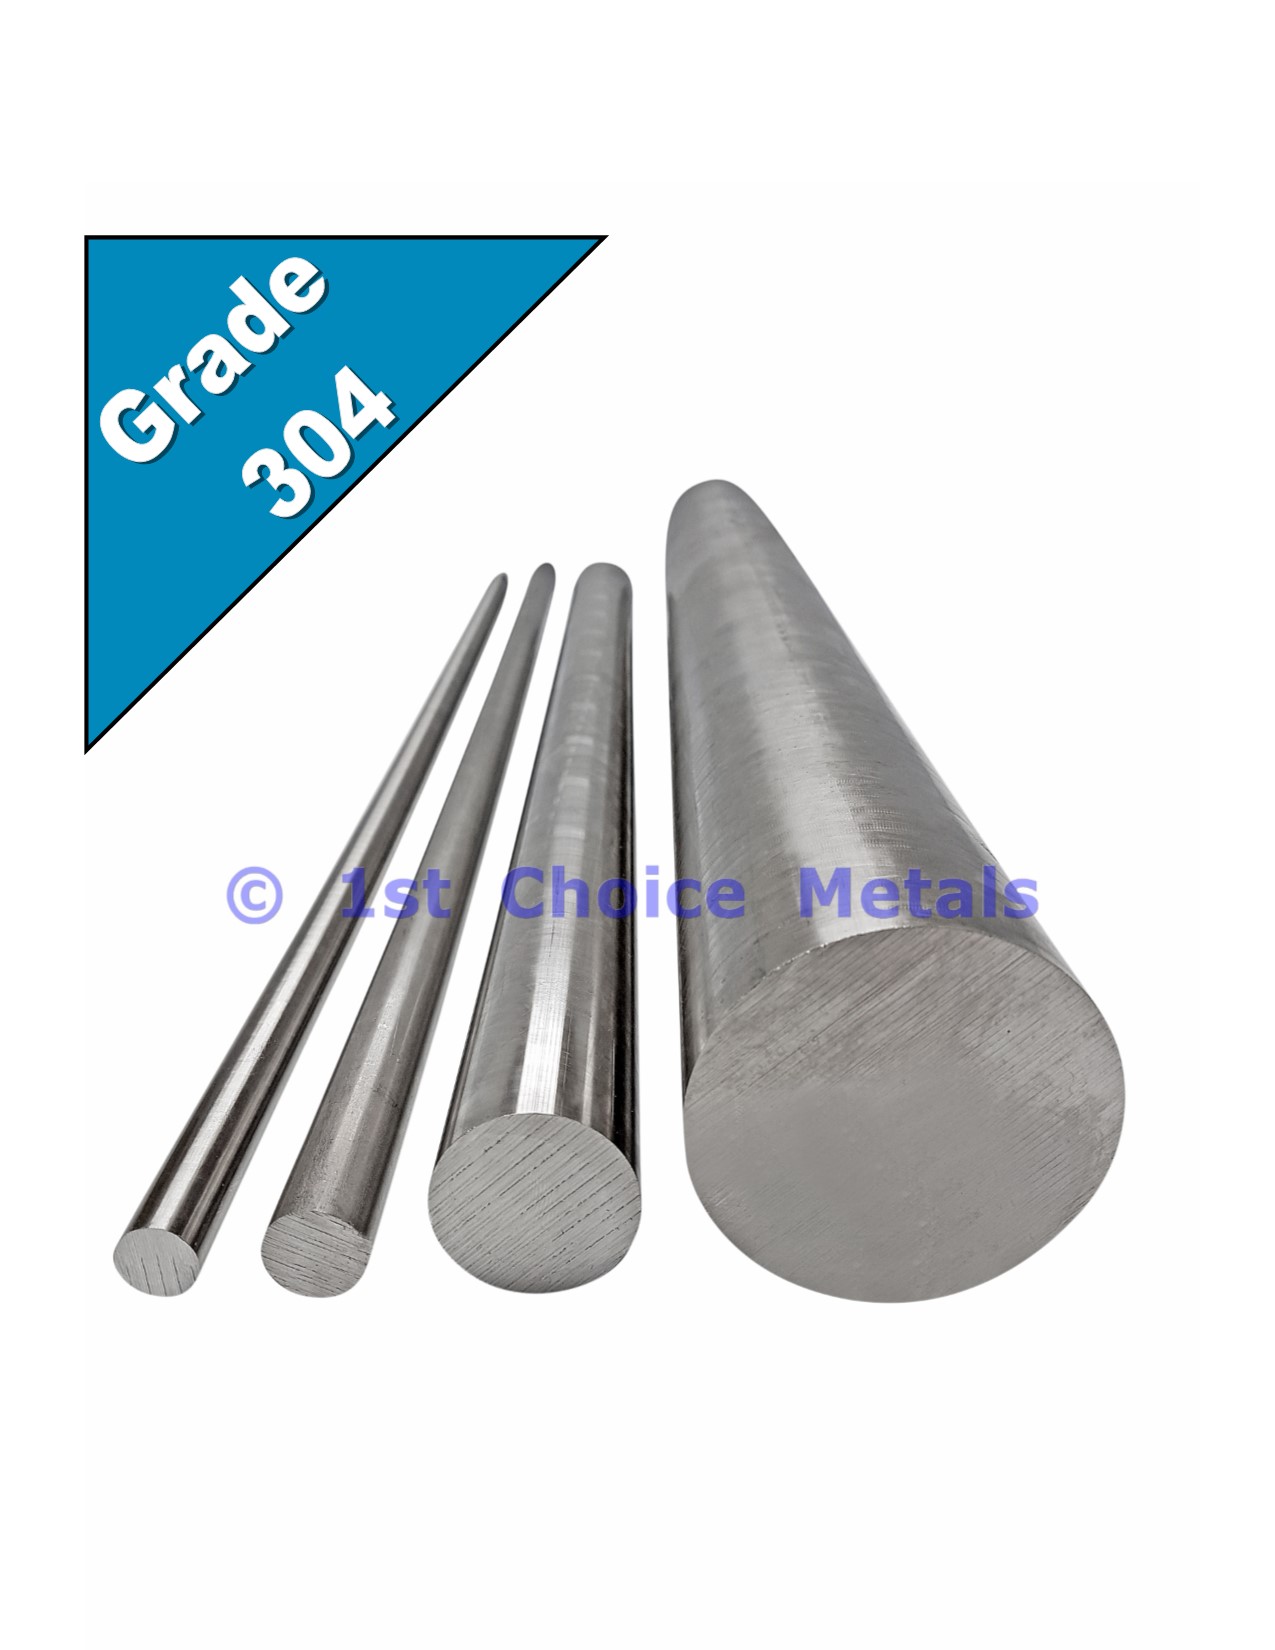 NEW Stainless Steel 303 Round Solid Bar 1/4" to 2" Dia 100mm to 1000mm Long 